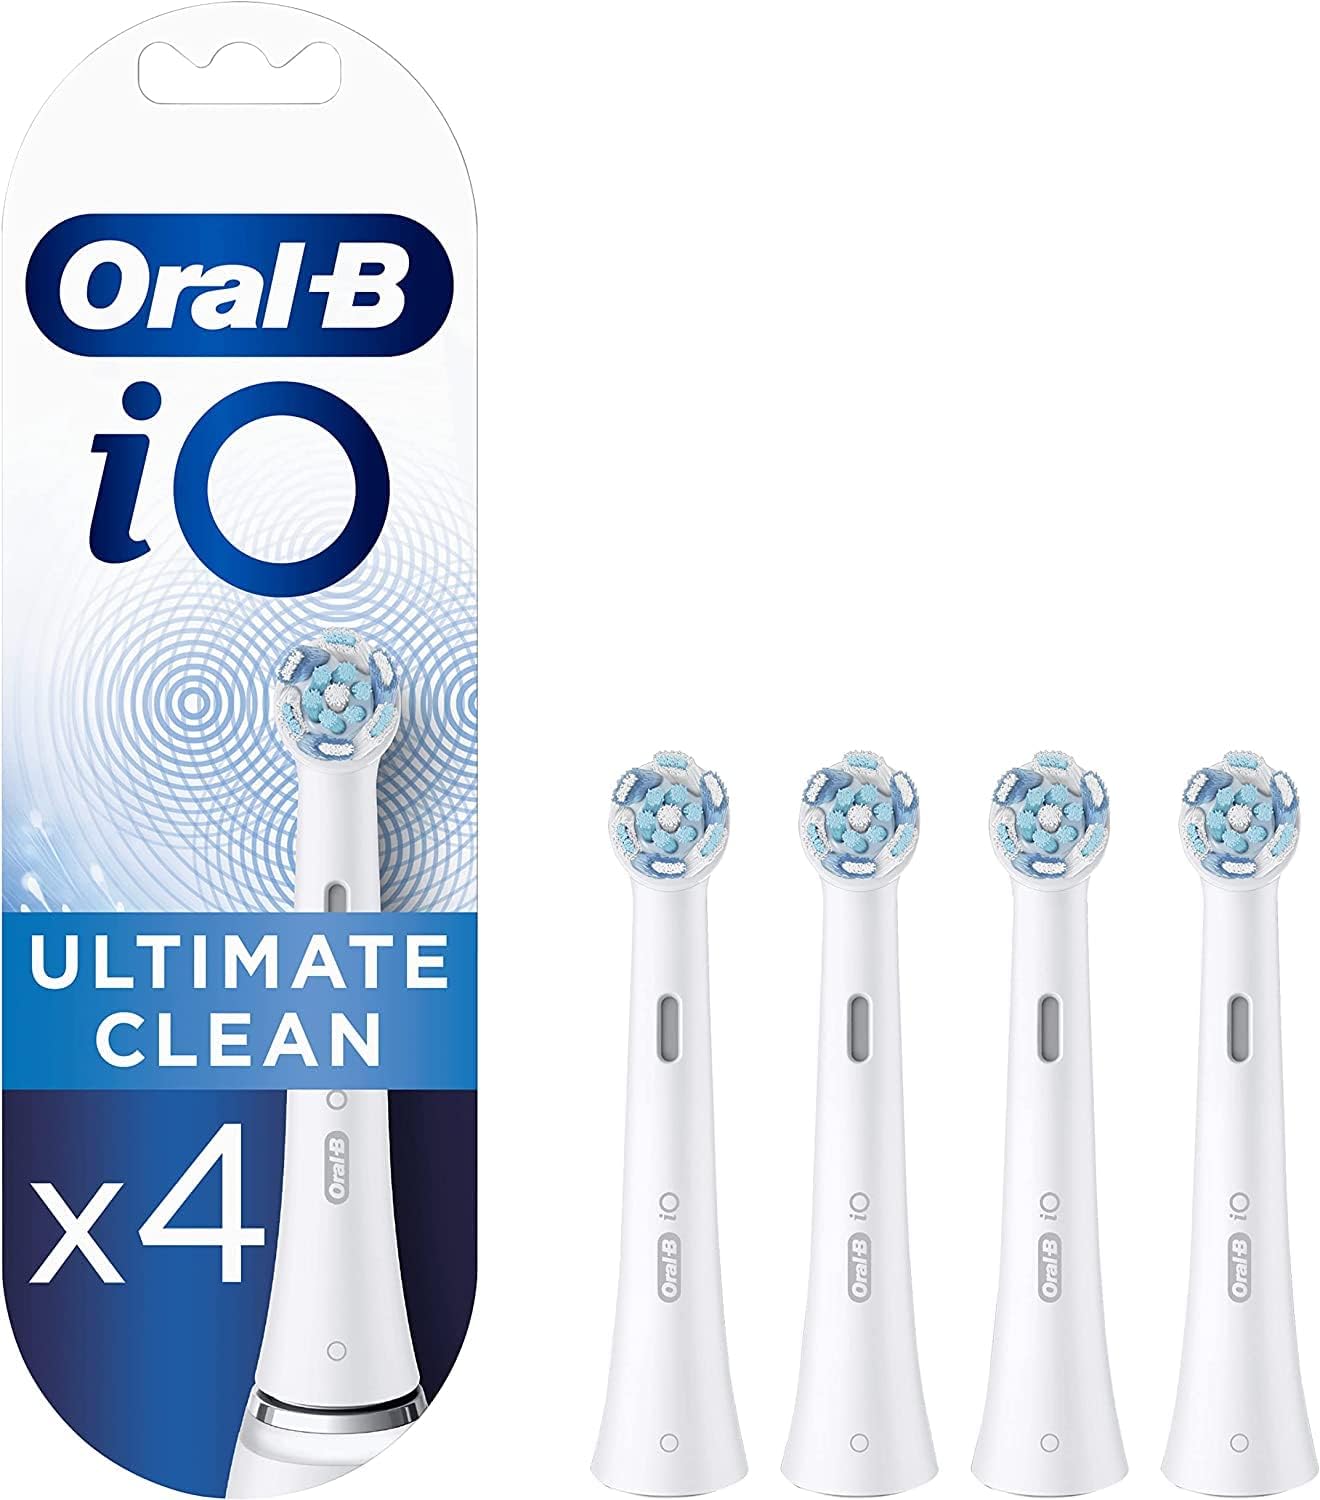 Oral B iO Ultimate Clean Brush Heads in White - Pack of 4